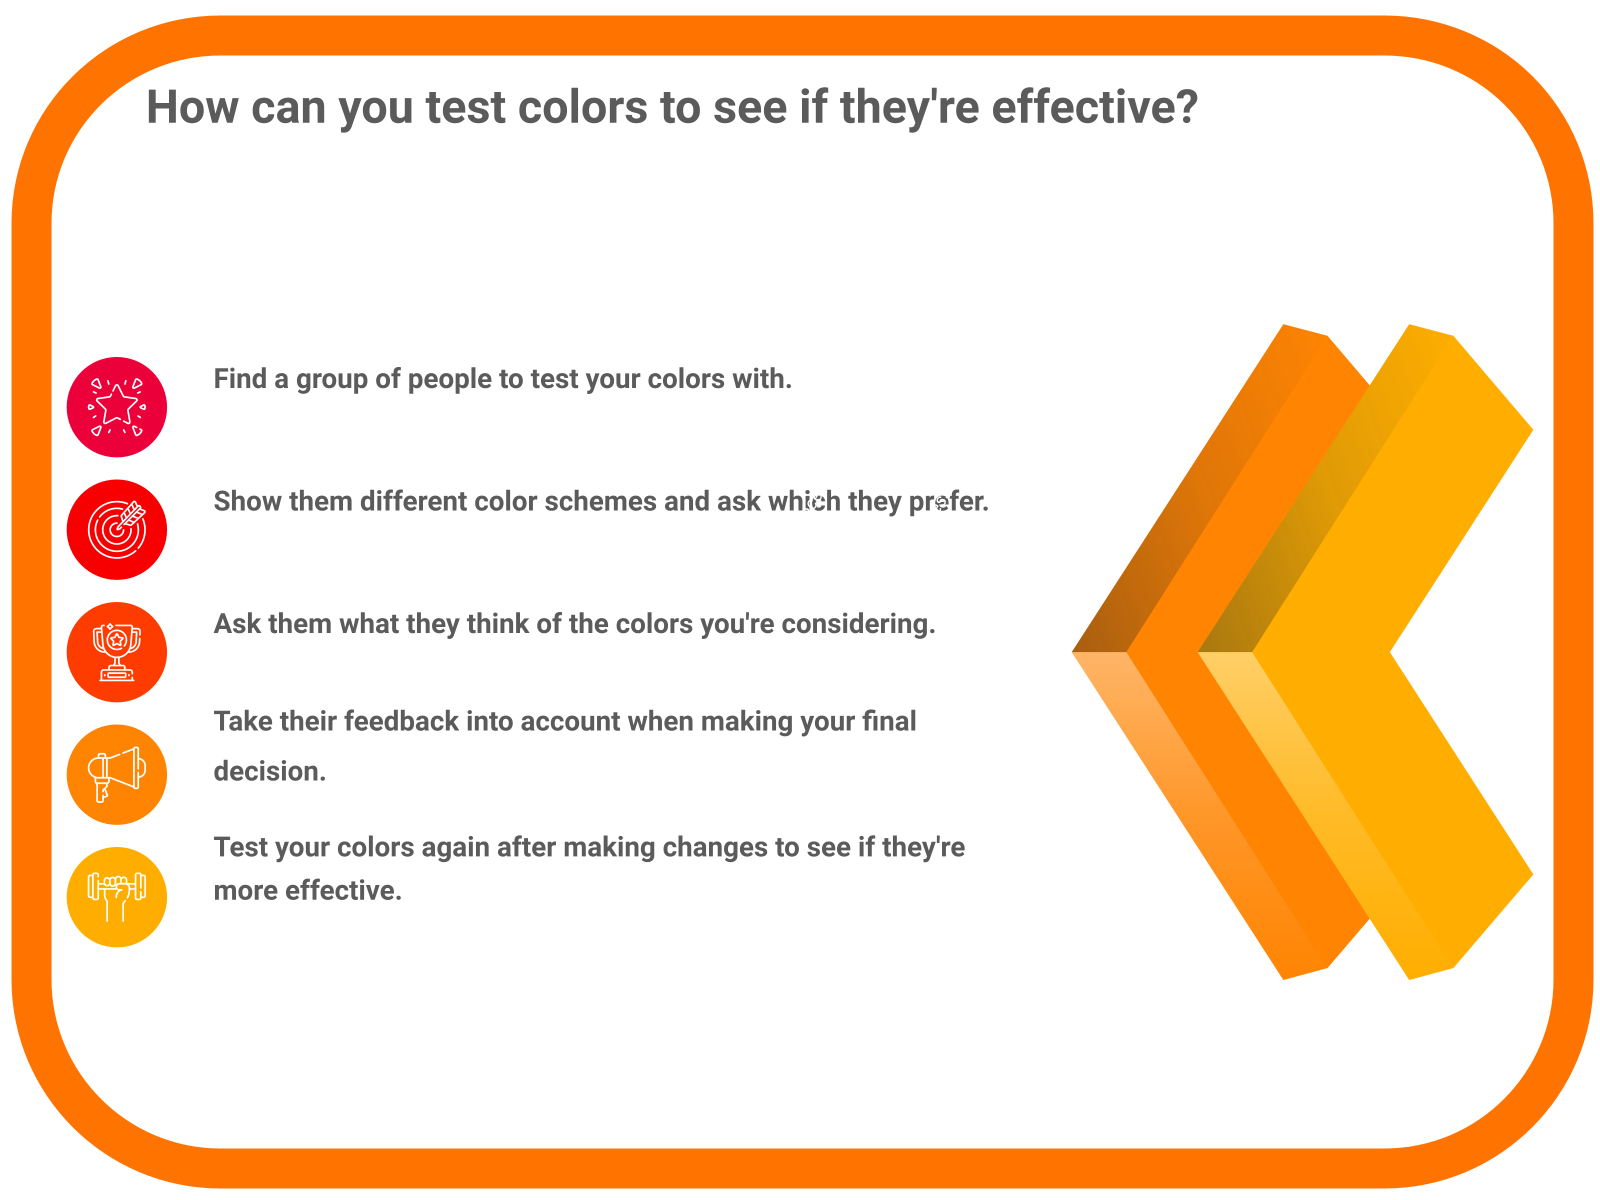 How can you test colors to see if they’re effective?